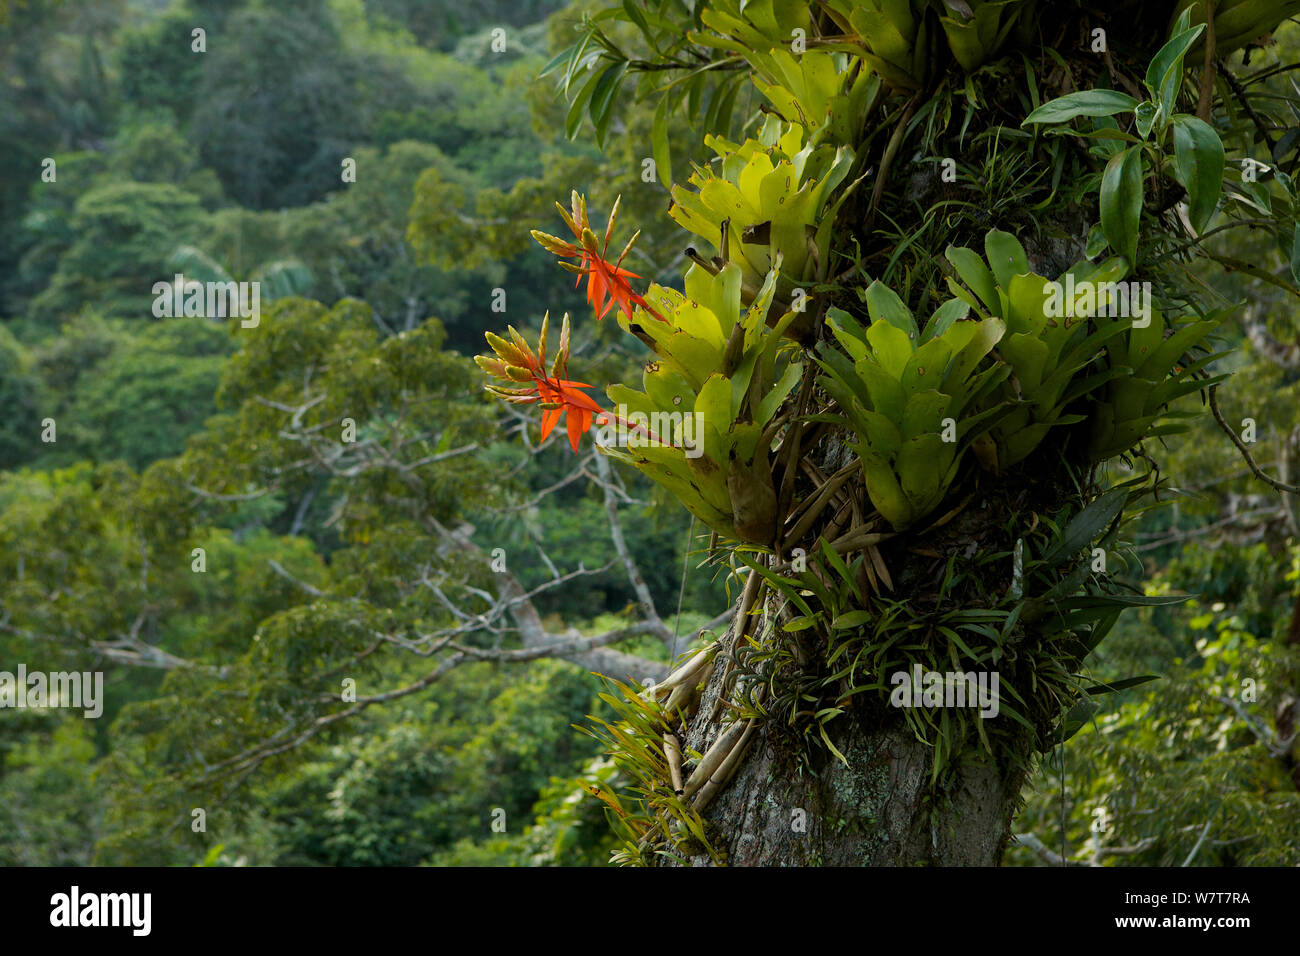 Amazon rain forest canopy view with flowering Bromeliad epiphytes growing on a branch of a giant Ceiba tree. Tiputini Biodiversity Station, Amazon Rainforest, Ecuador, January. Stock Photo